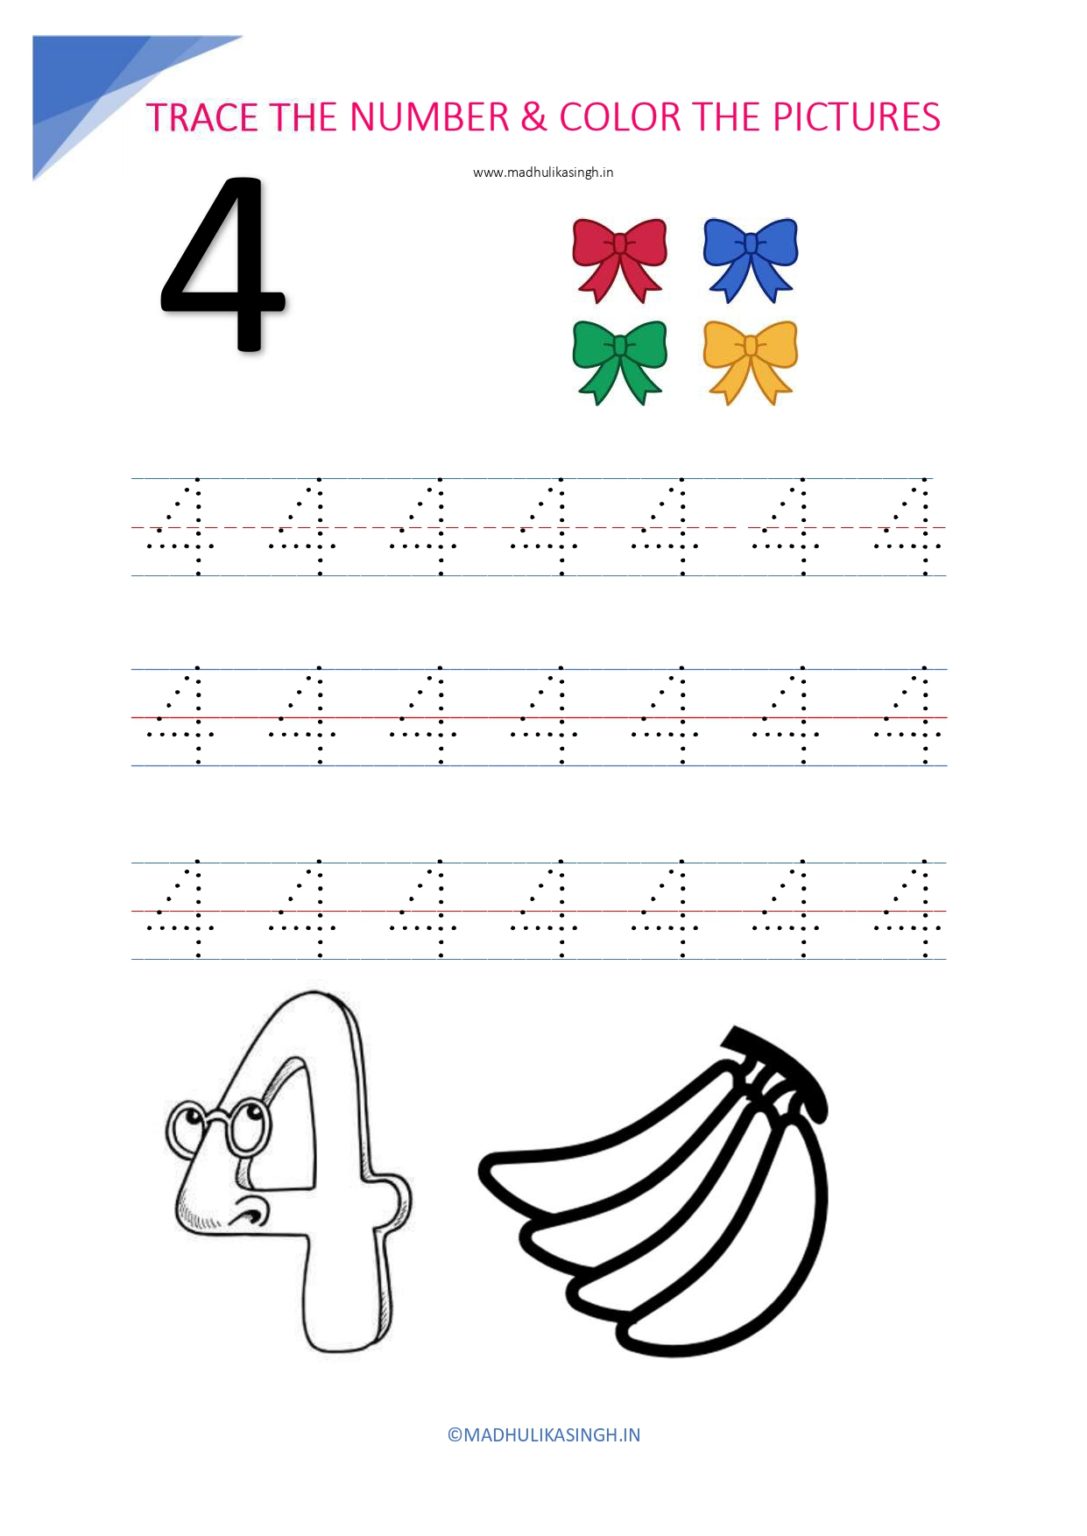 tracing-numbers-1-10-worksheets-tracing-worksheets-preschool-tracing-numbers-1-to-5-worksheet